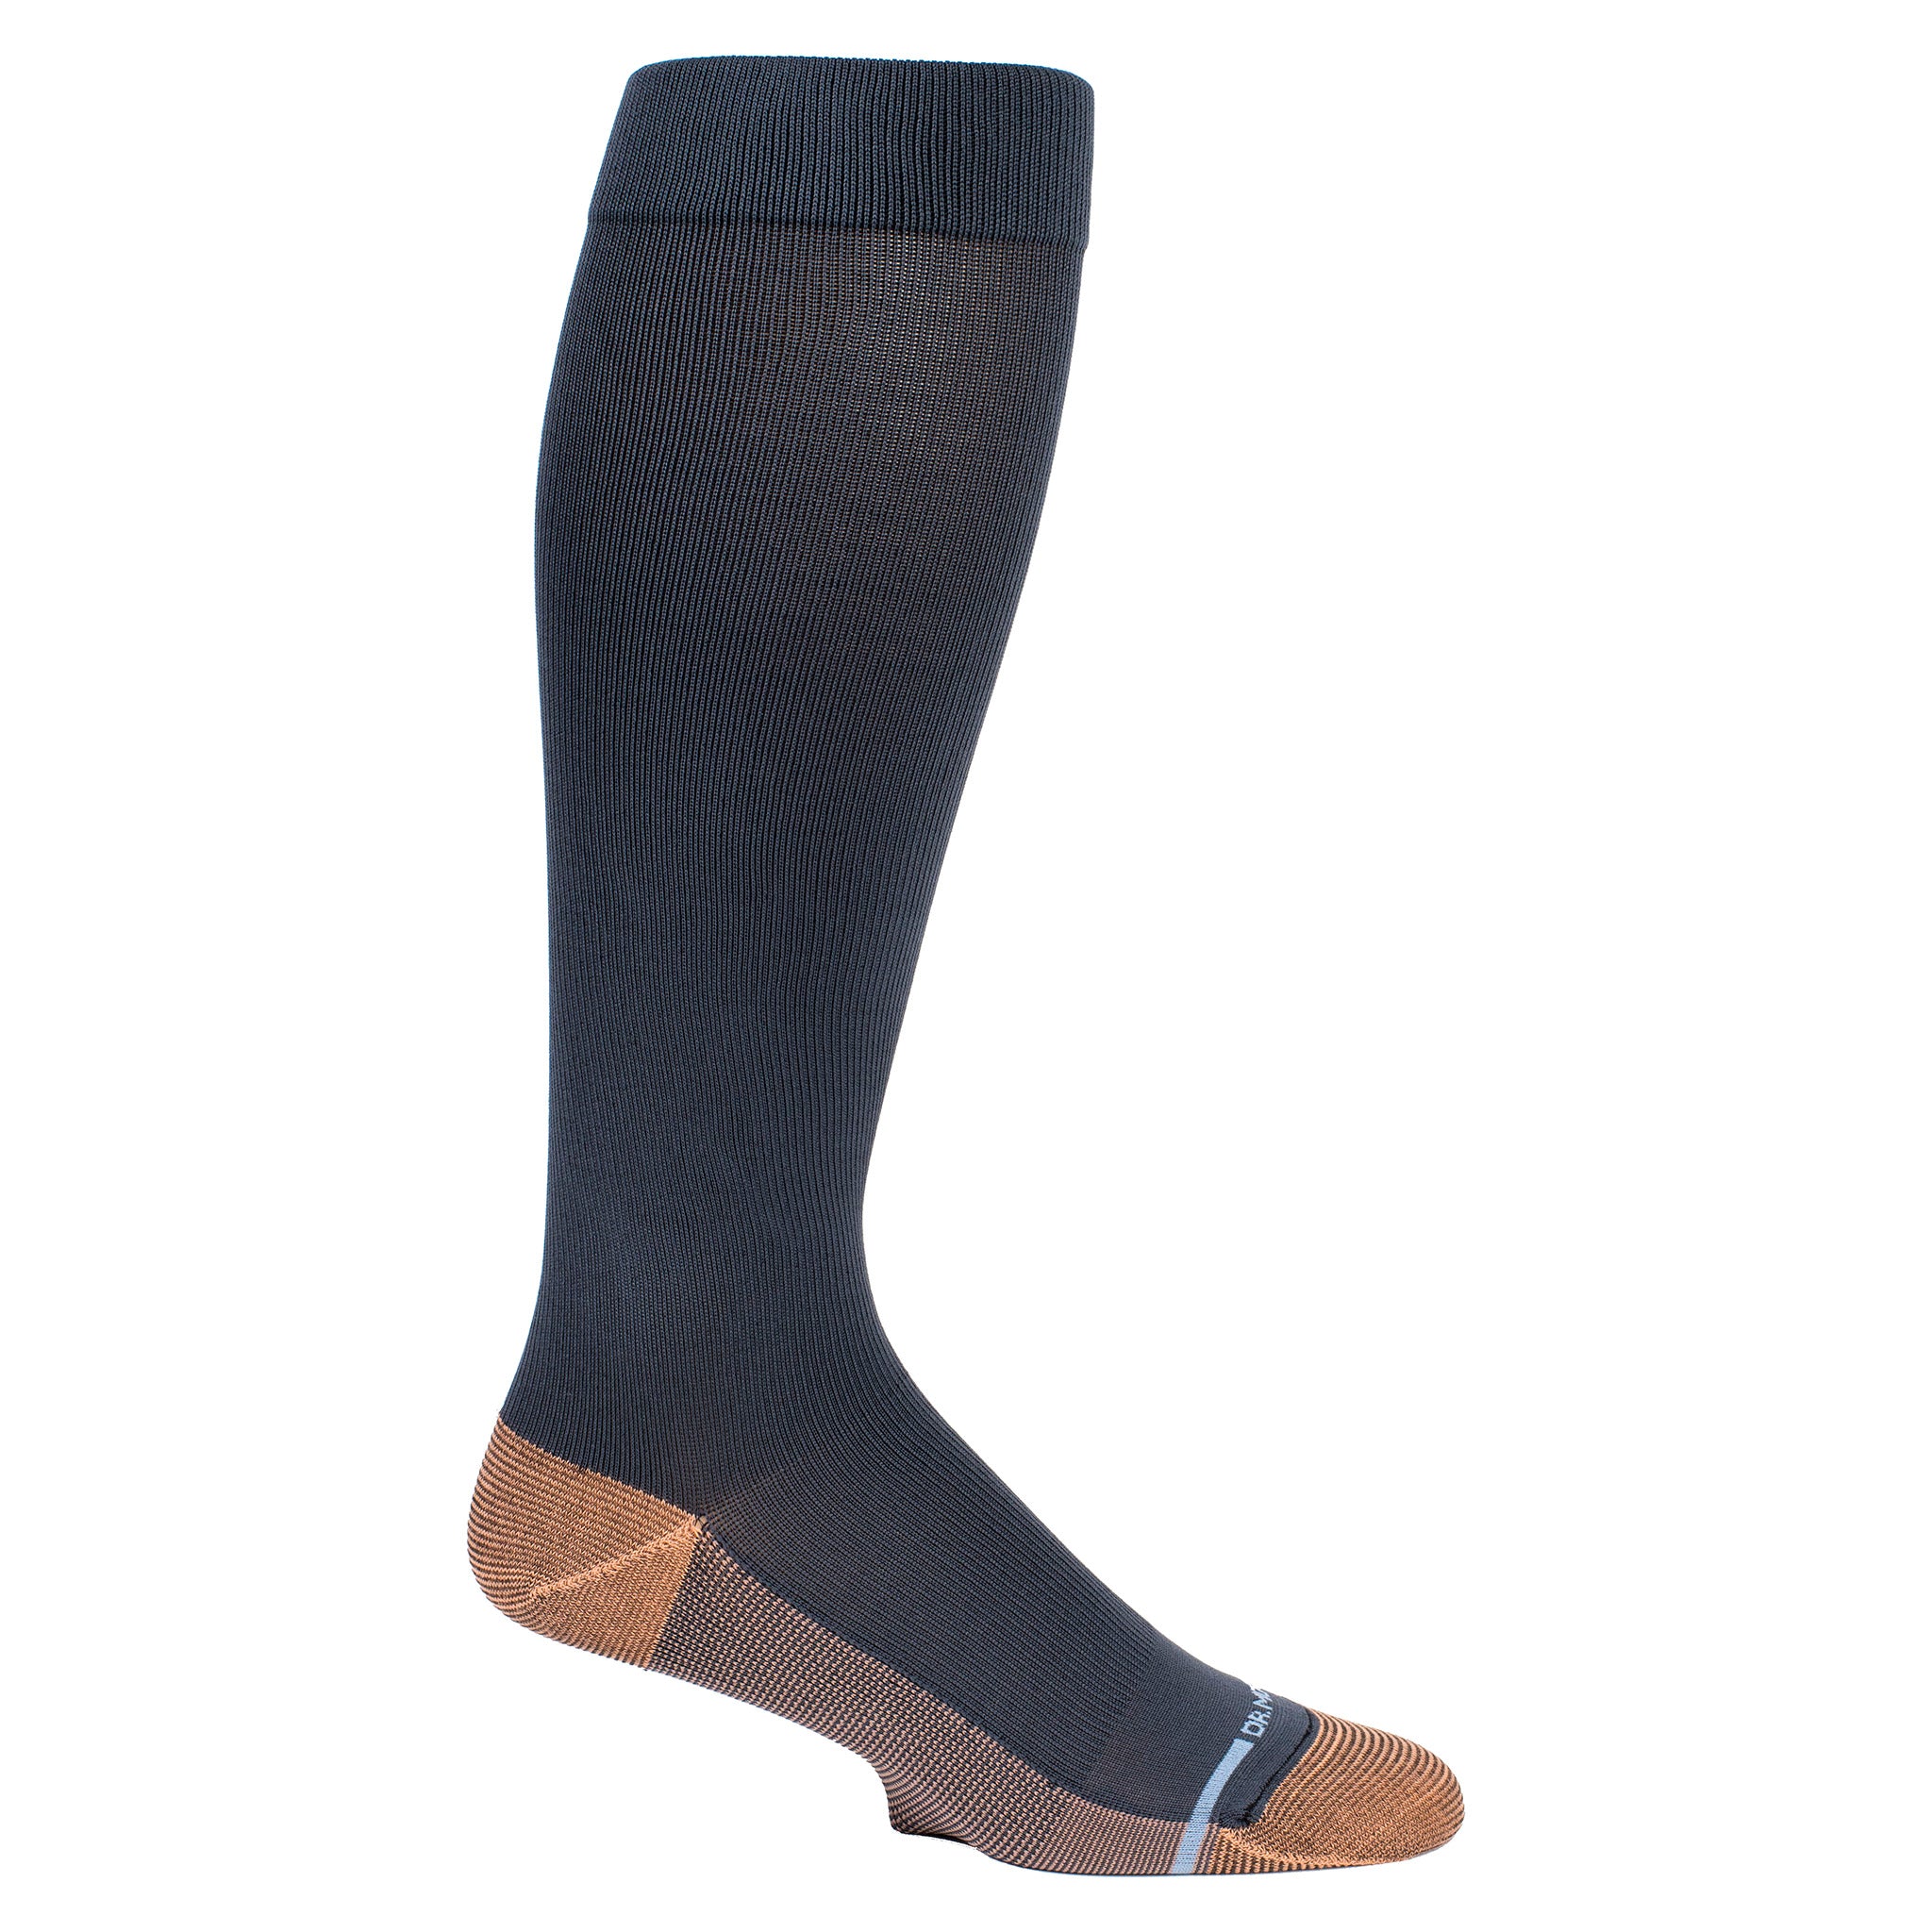 Copper Infused Compression Socks by Sharper Image (2 Pairs) @